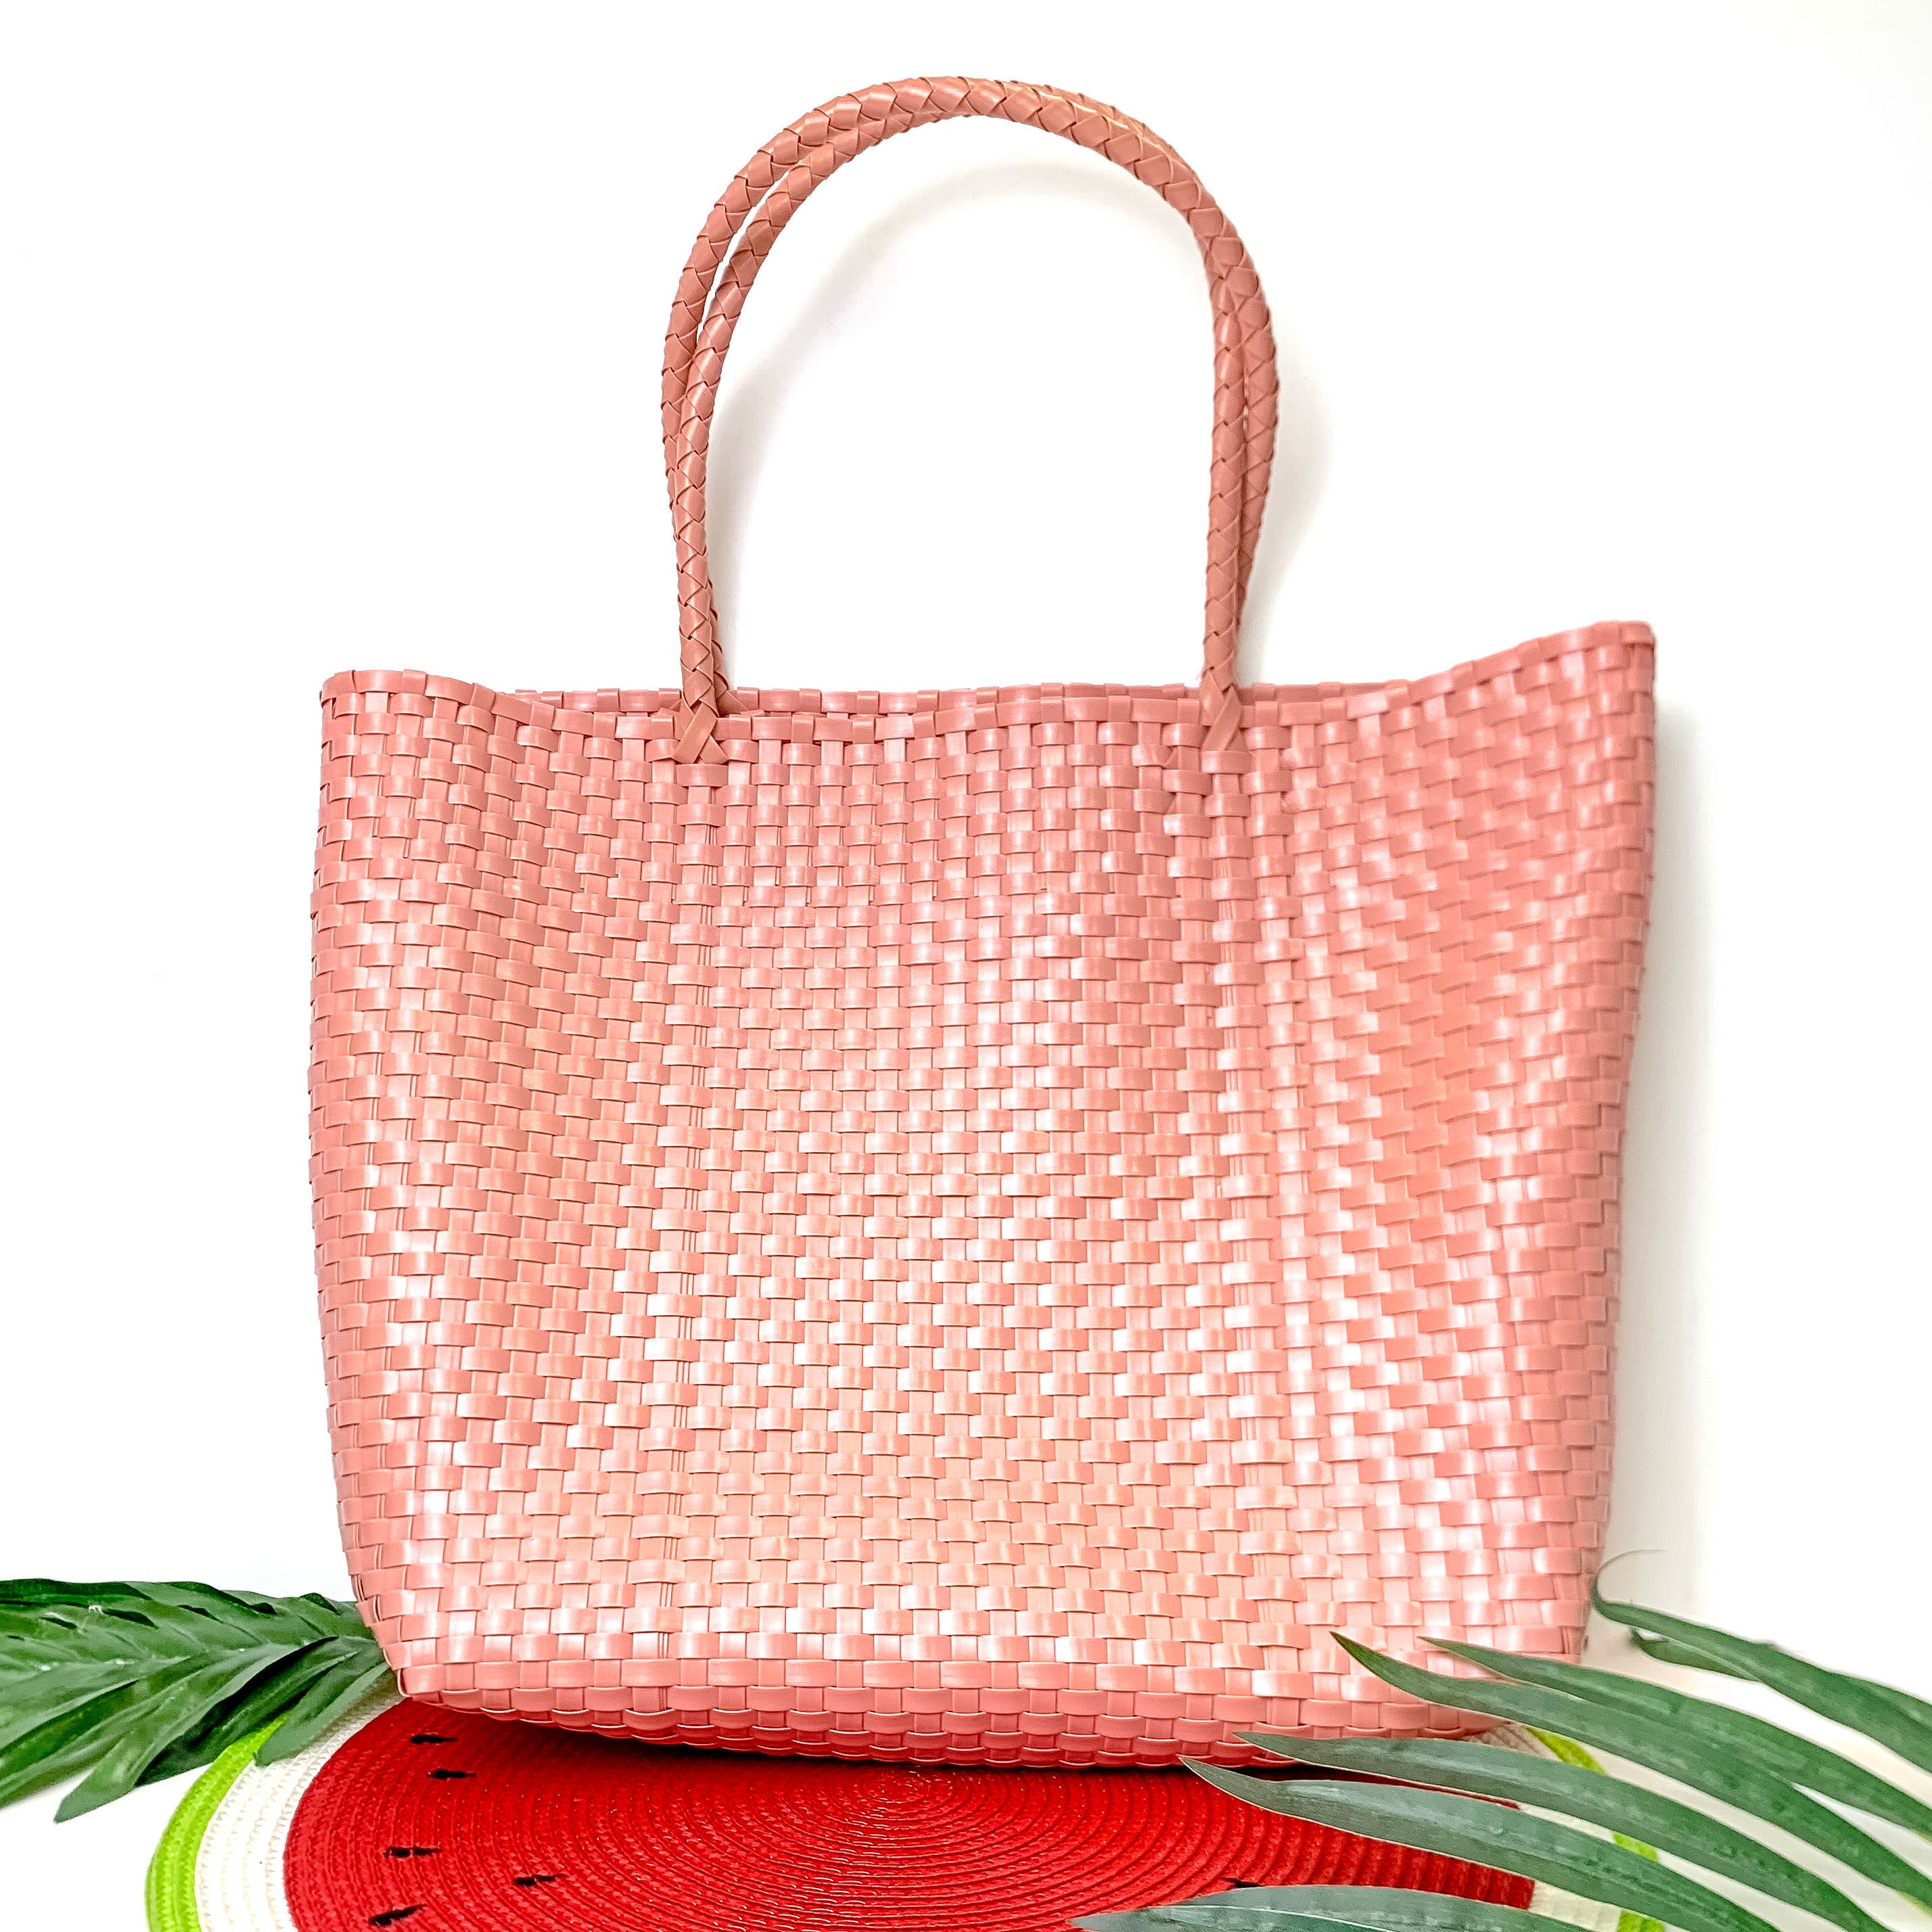 Coastal Couture Carryall Tote Bag in Dusty Coral Pink - Giddy Up Glamour Boutique